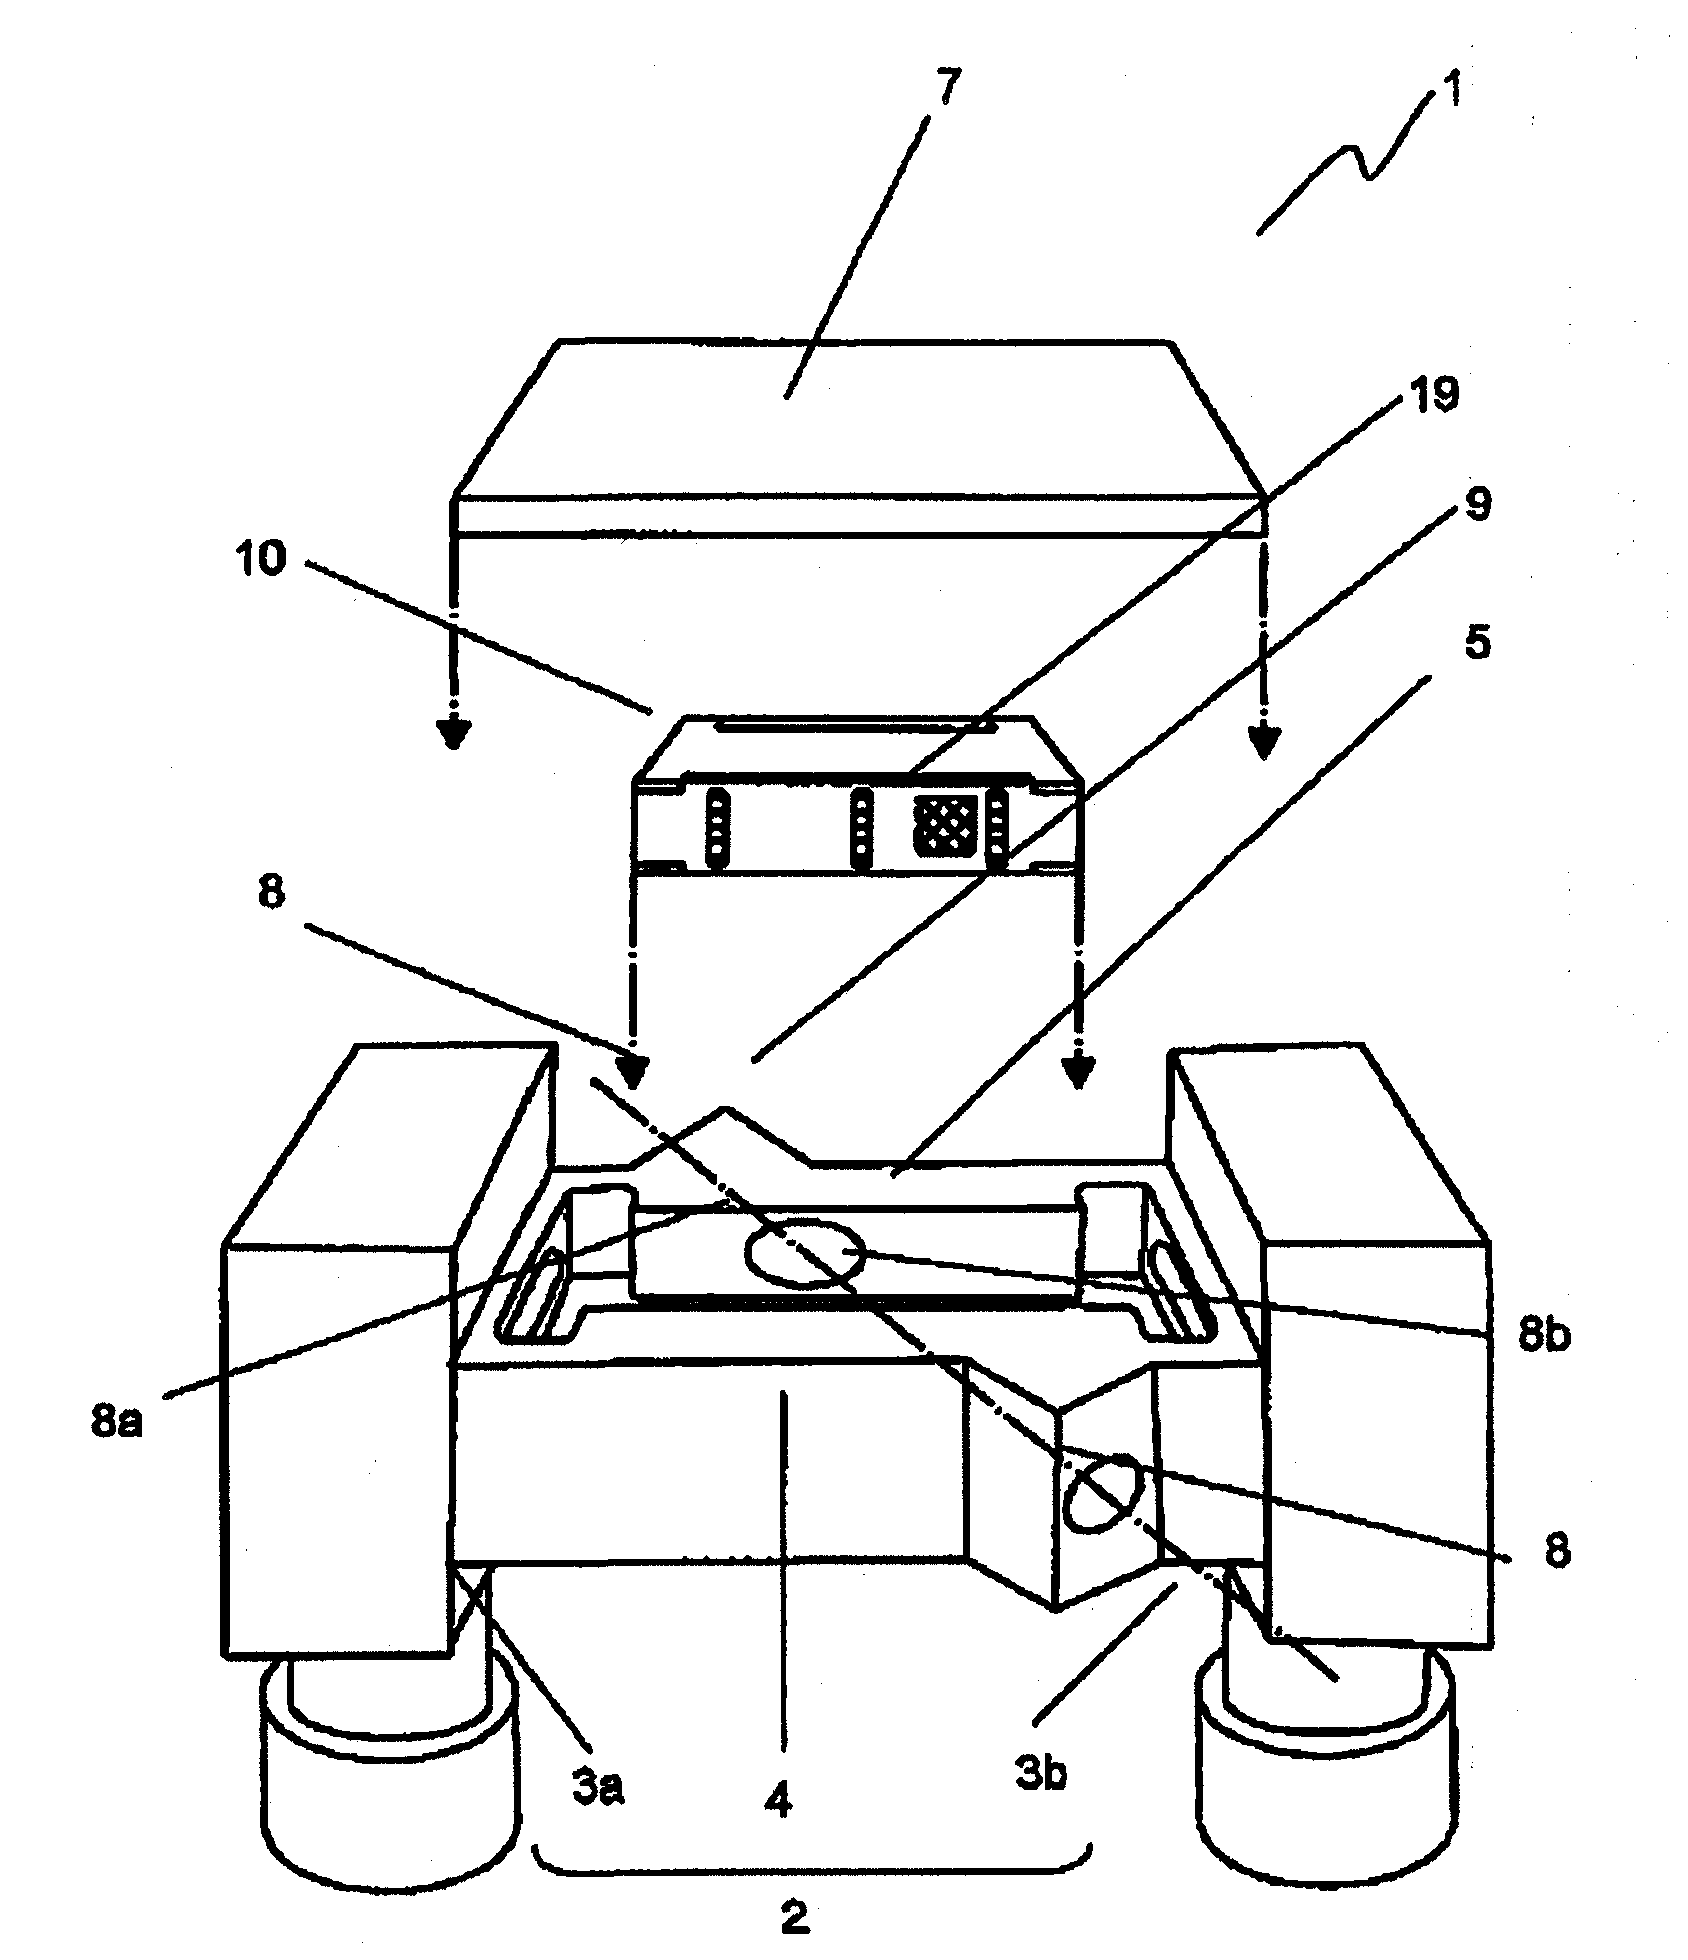 Multilayer channel member and ultrasonic fluid measuring device using same